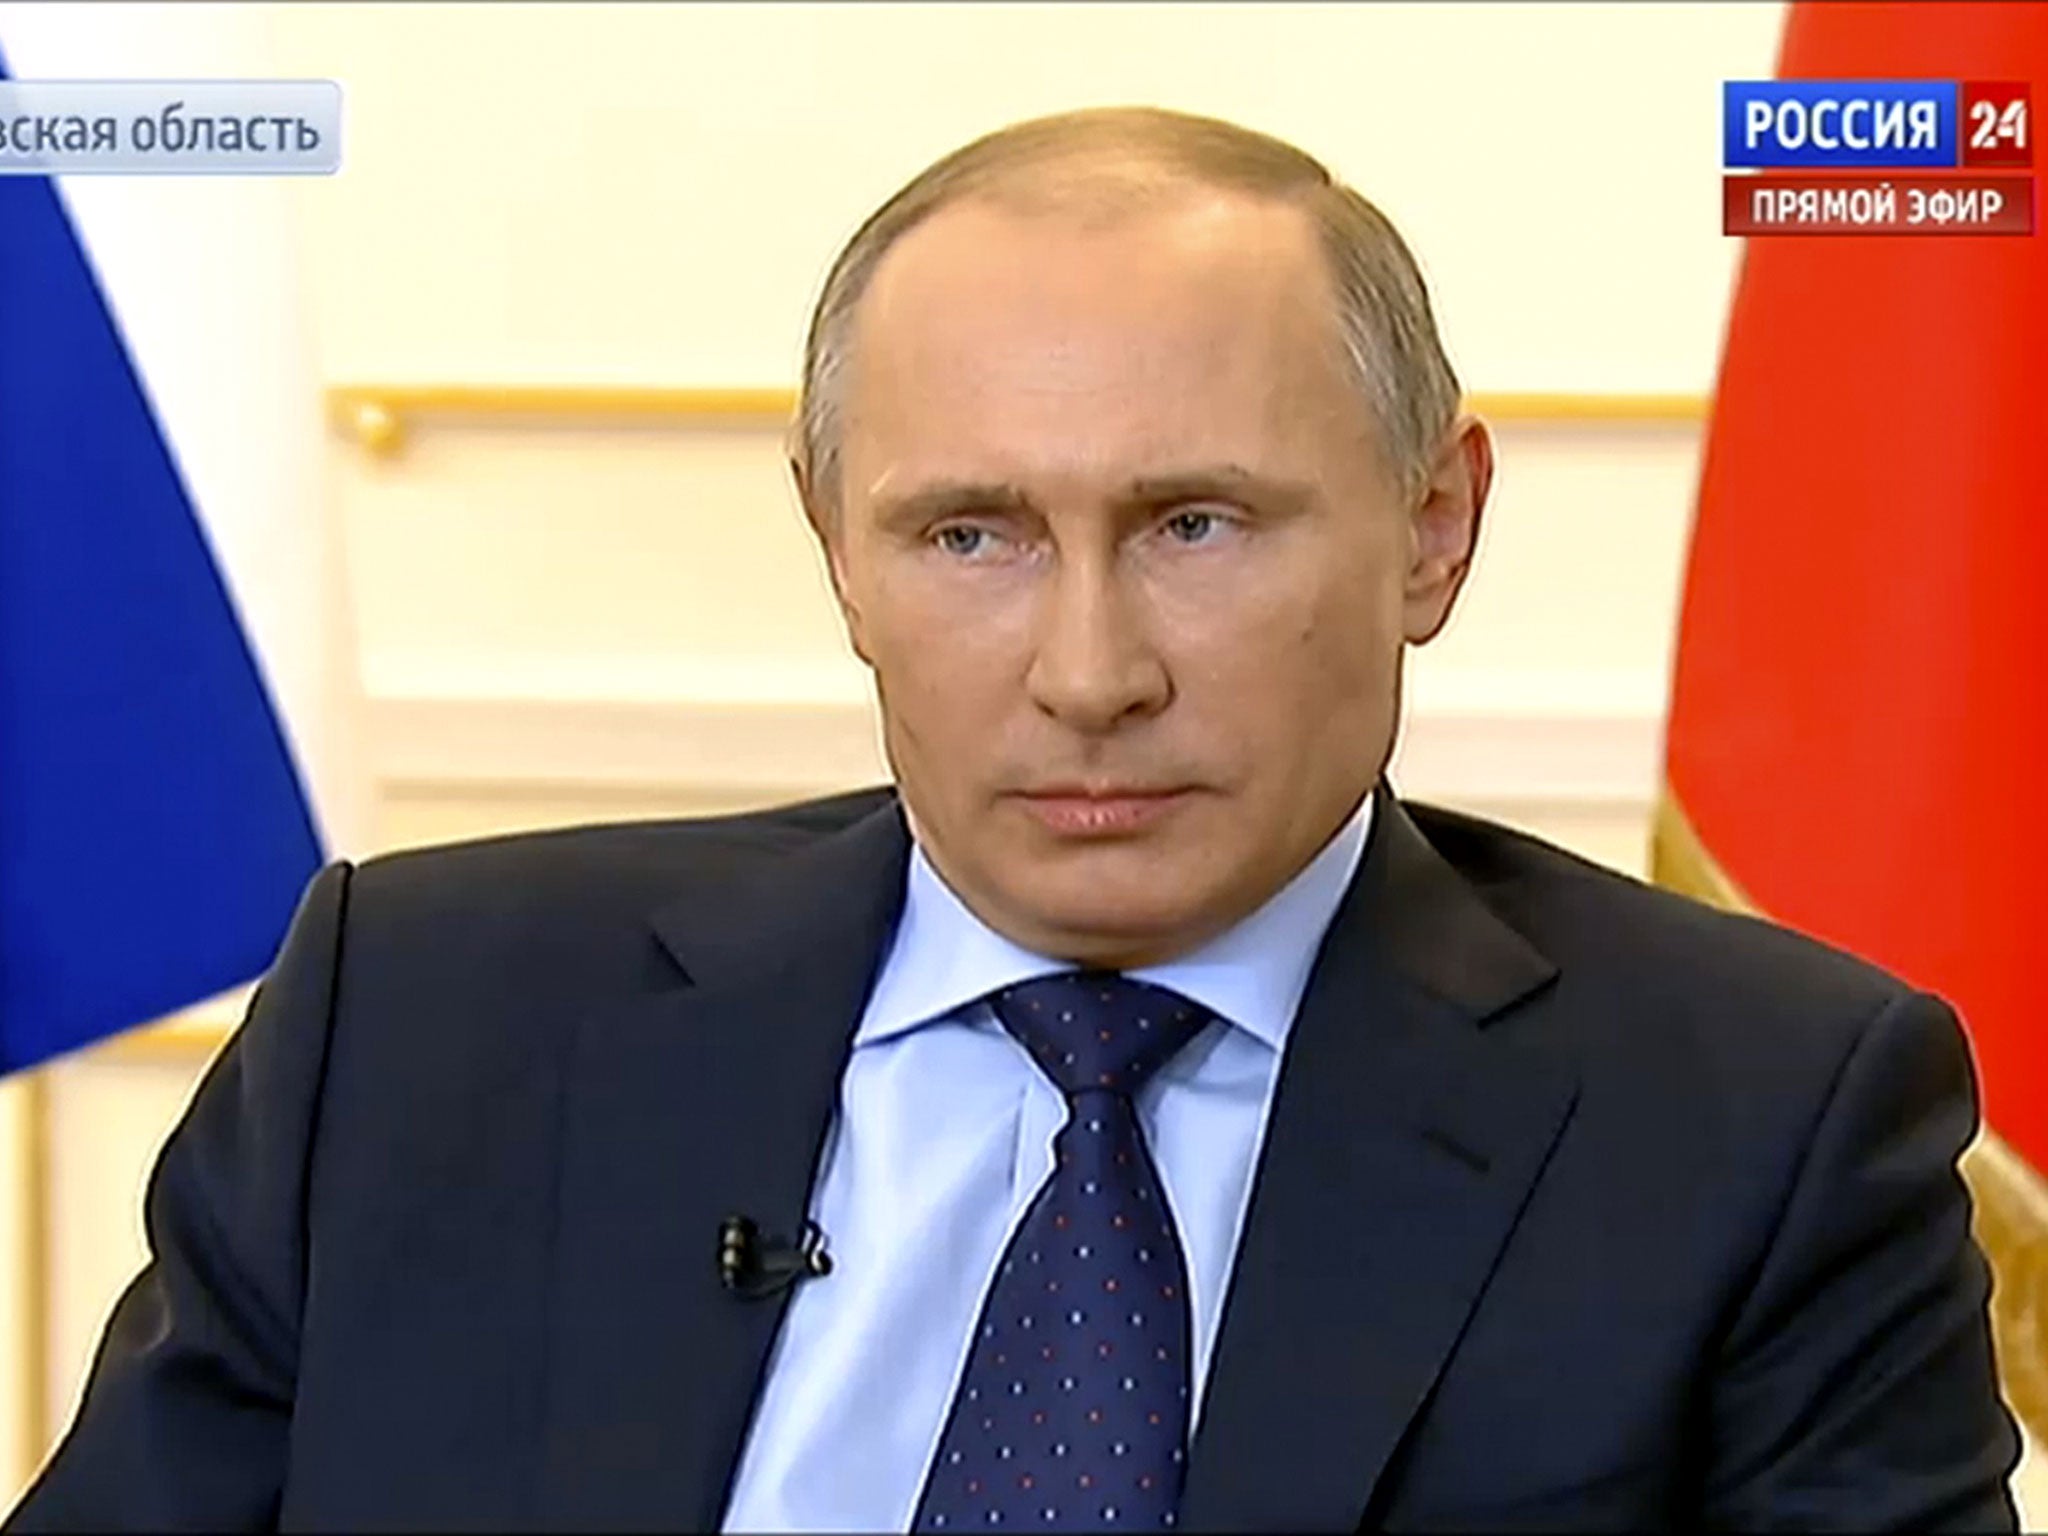 President Vladimir Putin, during a live feed, answers journalists' questions on the current situation around Ukraine at the Novo-Ogaryovo presidential residence outside Moscow